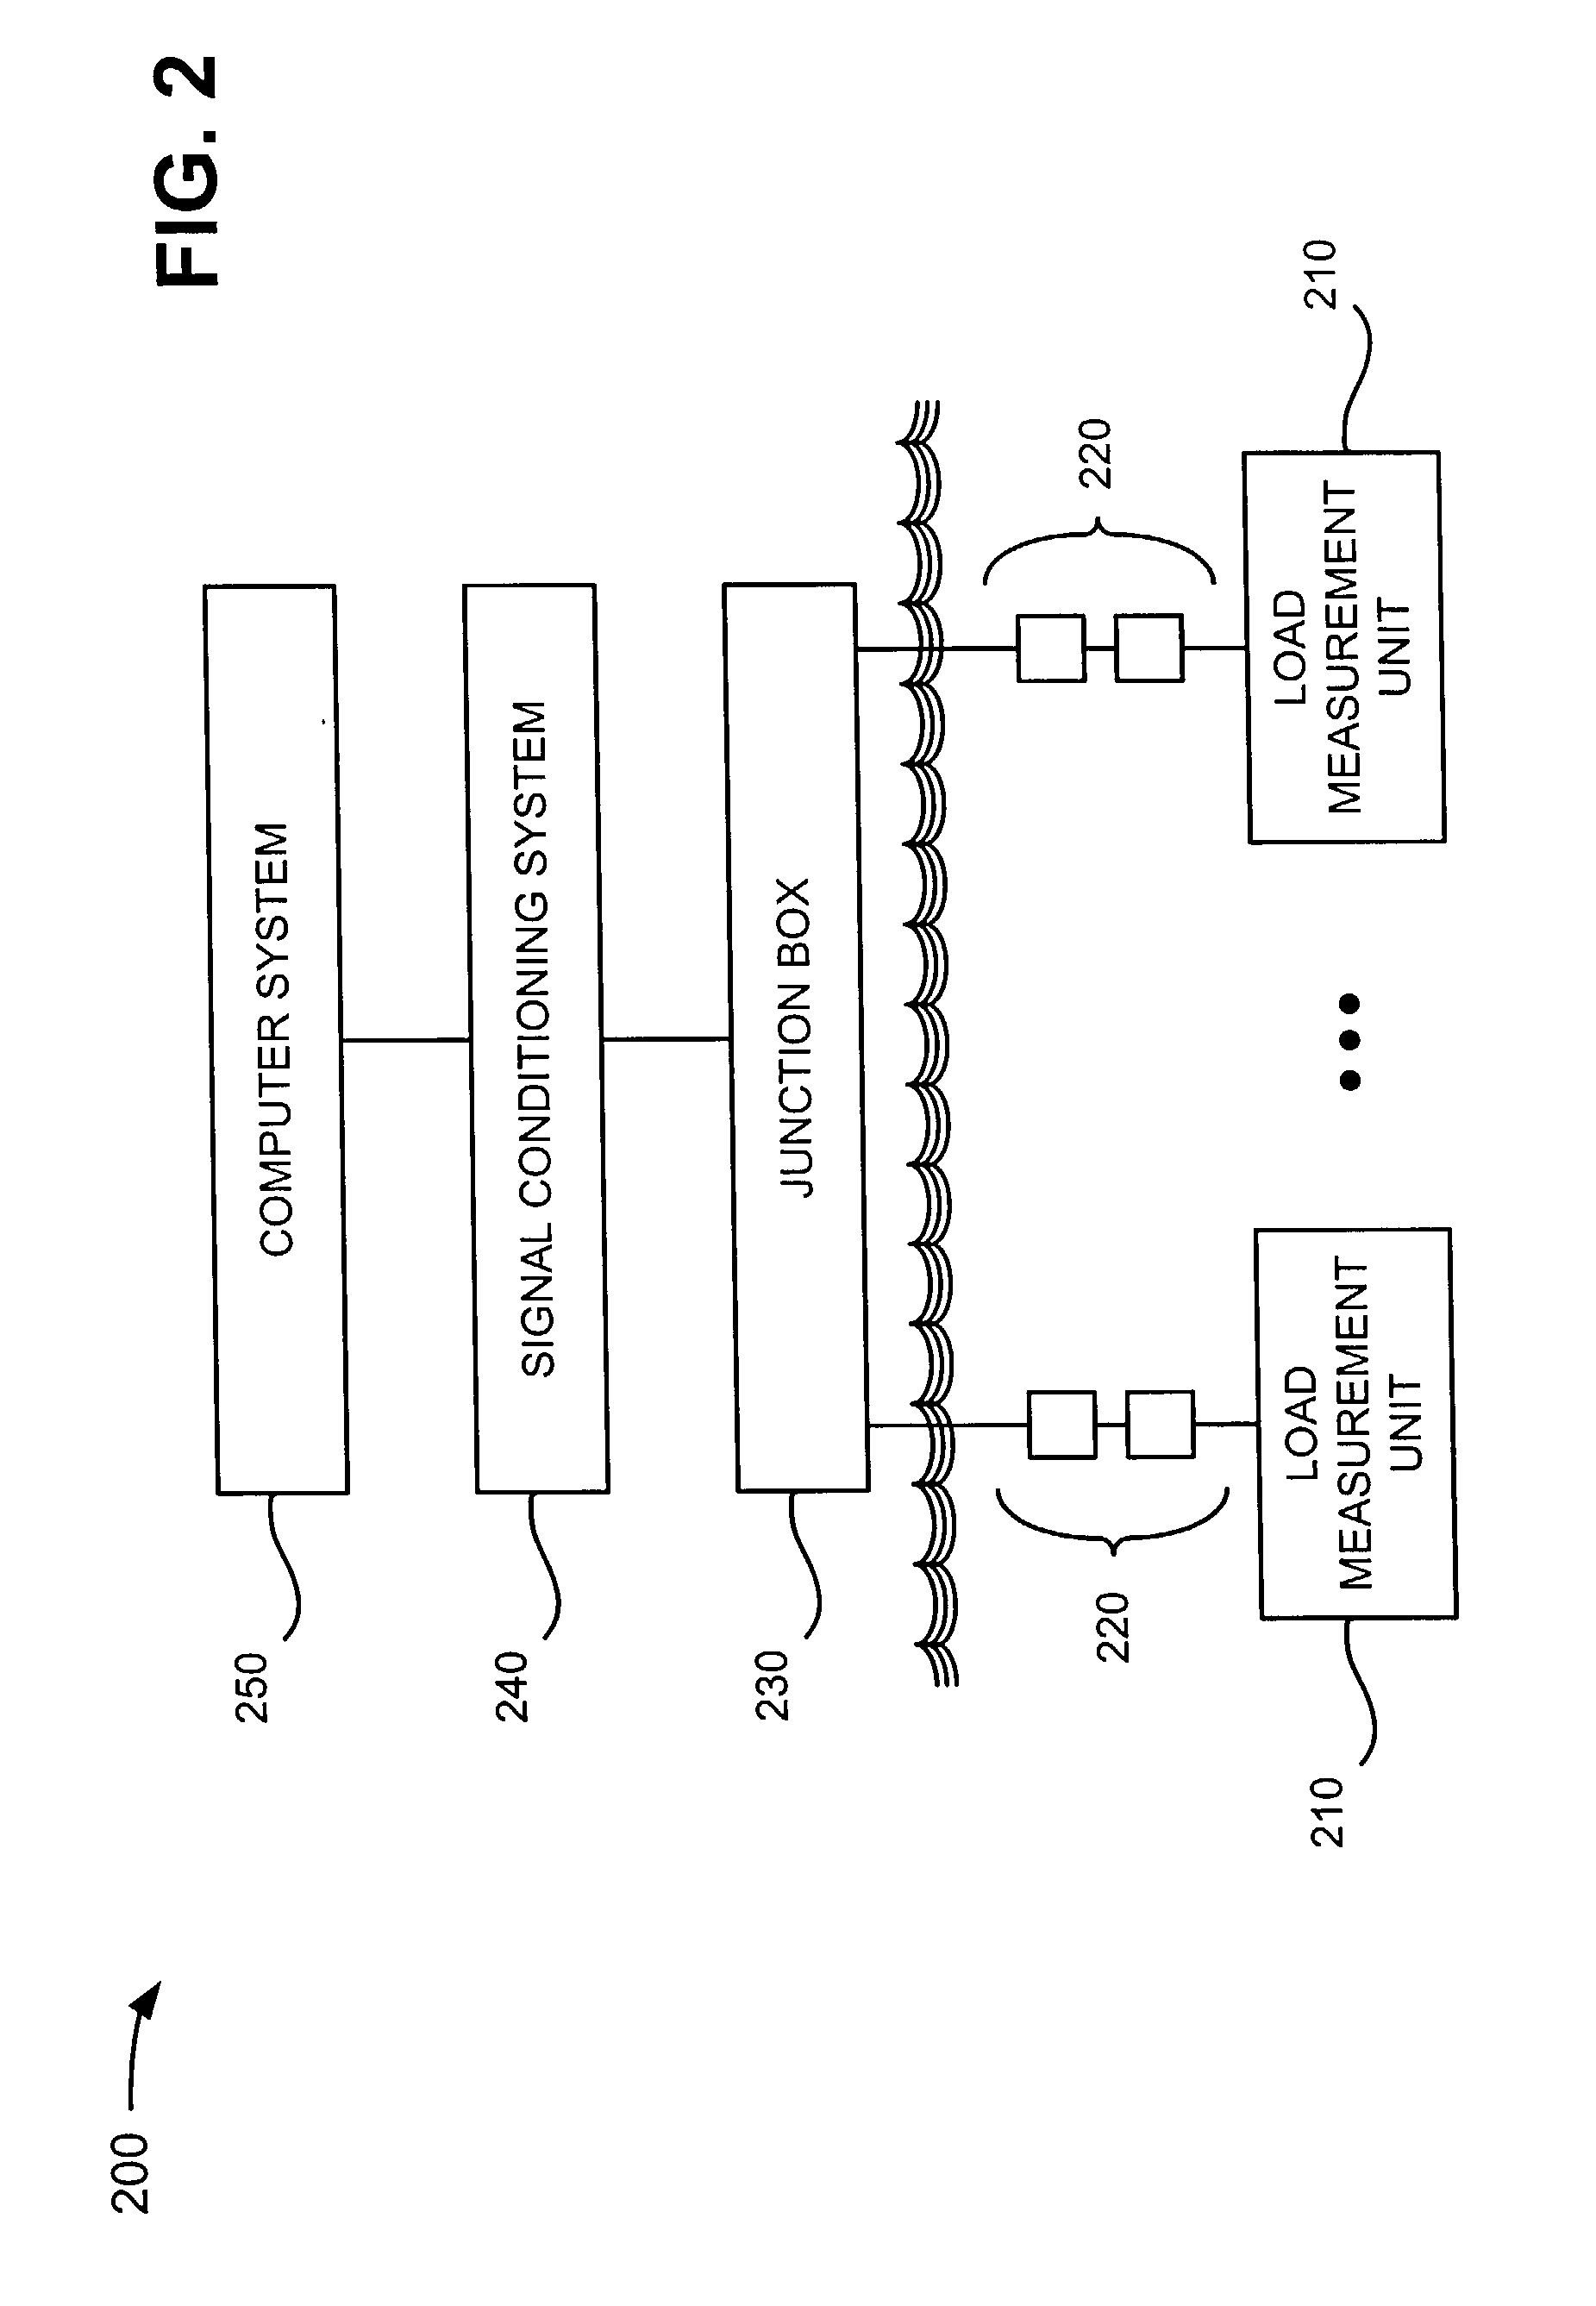 Load monitoring systems and methods